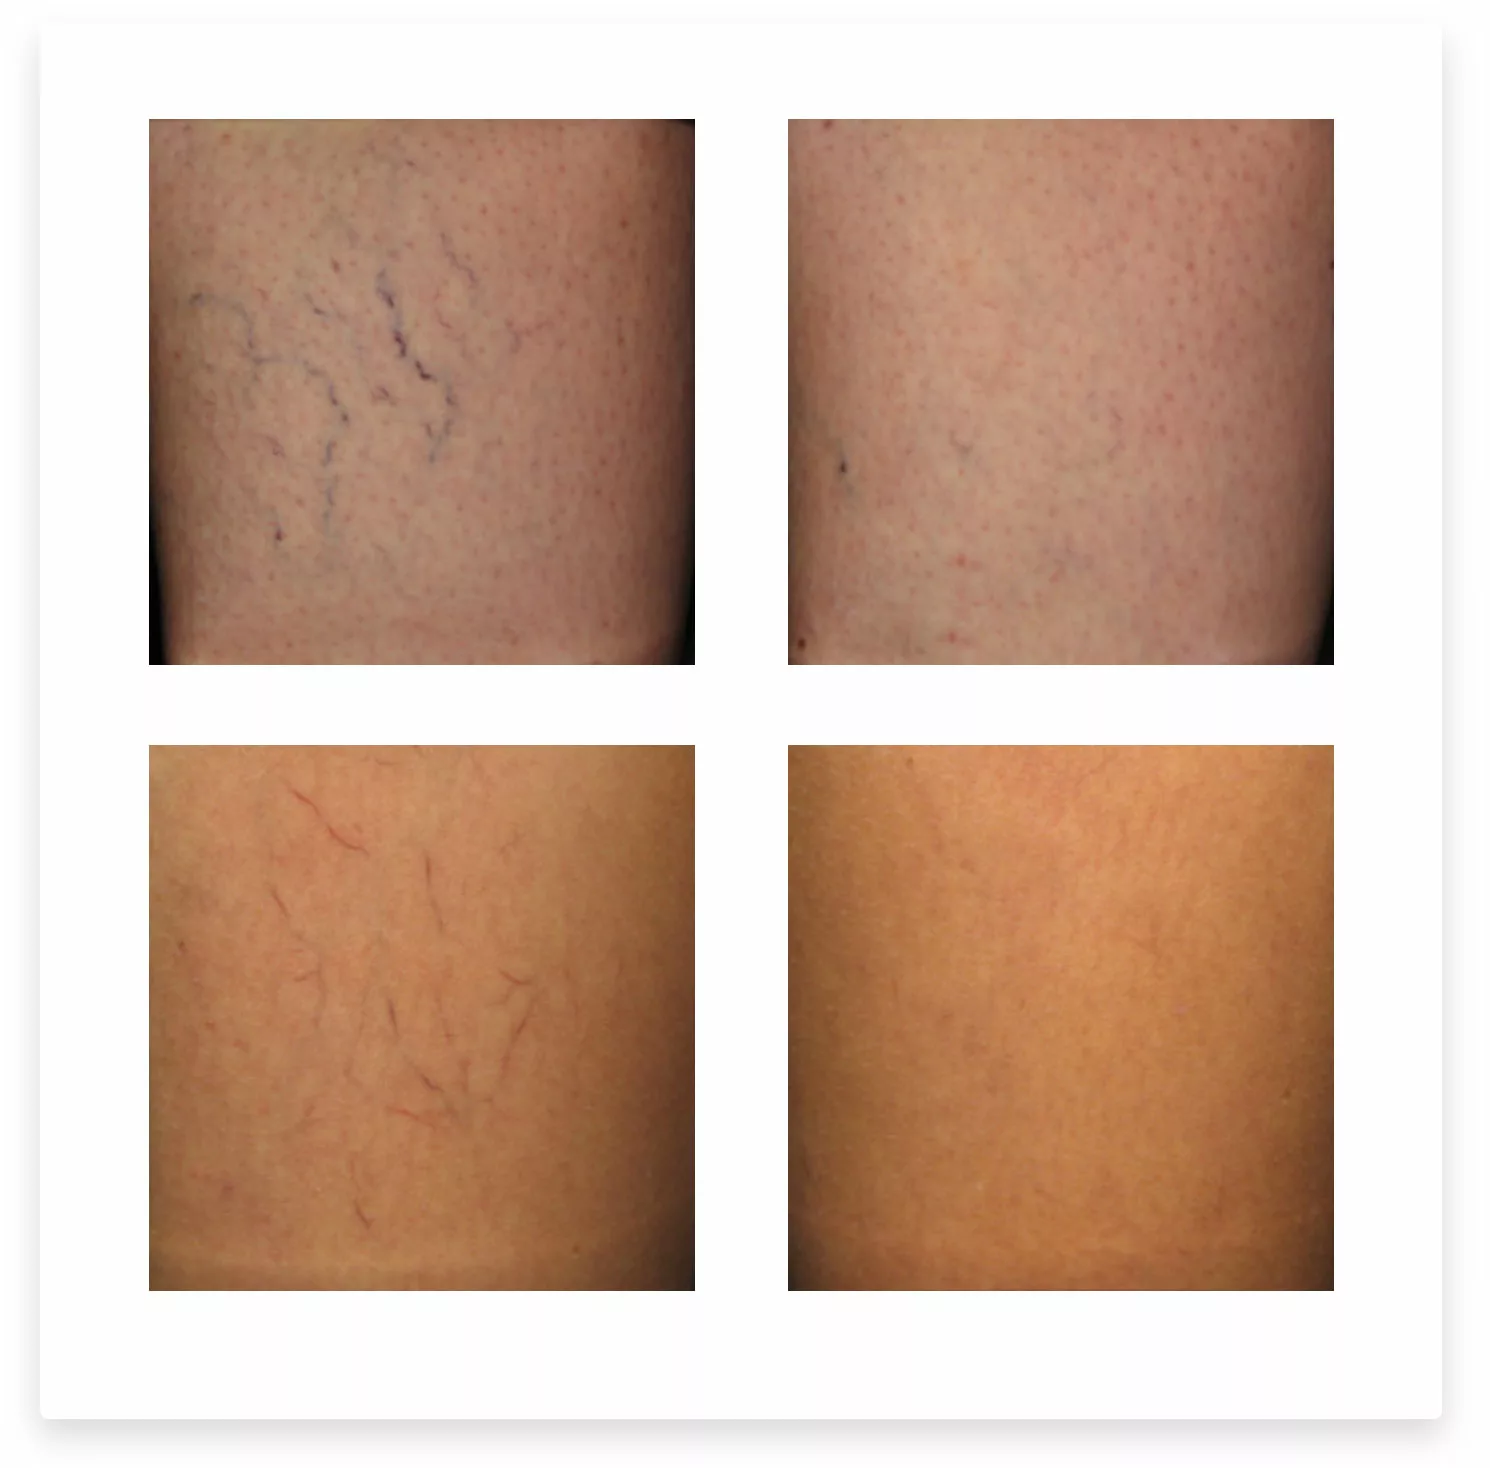 Spider vein treatment with Aesclera at SANTÉ Aesthetics & Wellnes in Portland, Oregon BEFORE & AFTER PHOTOS